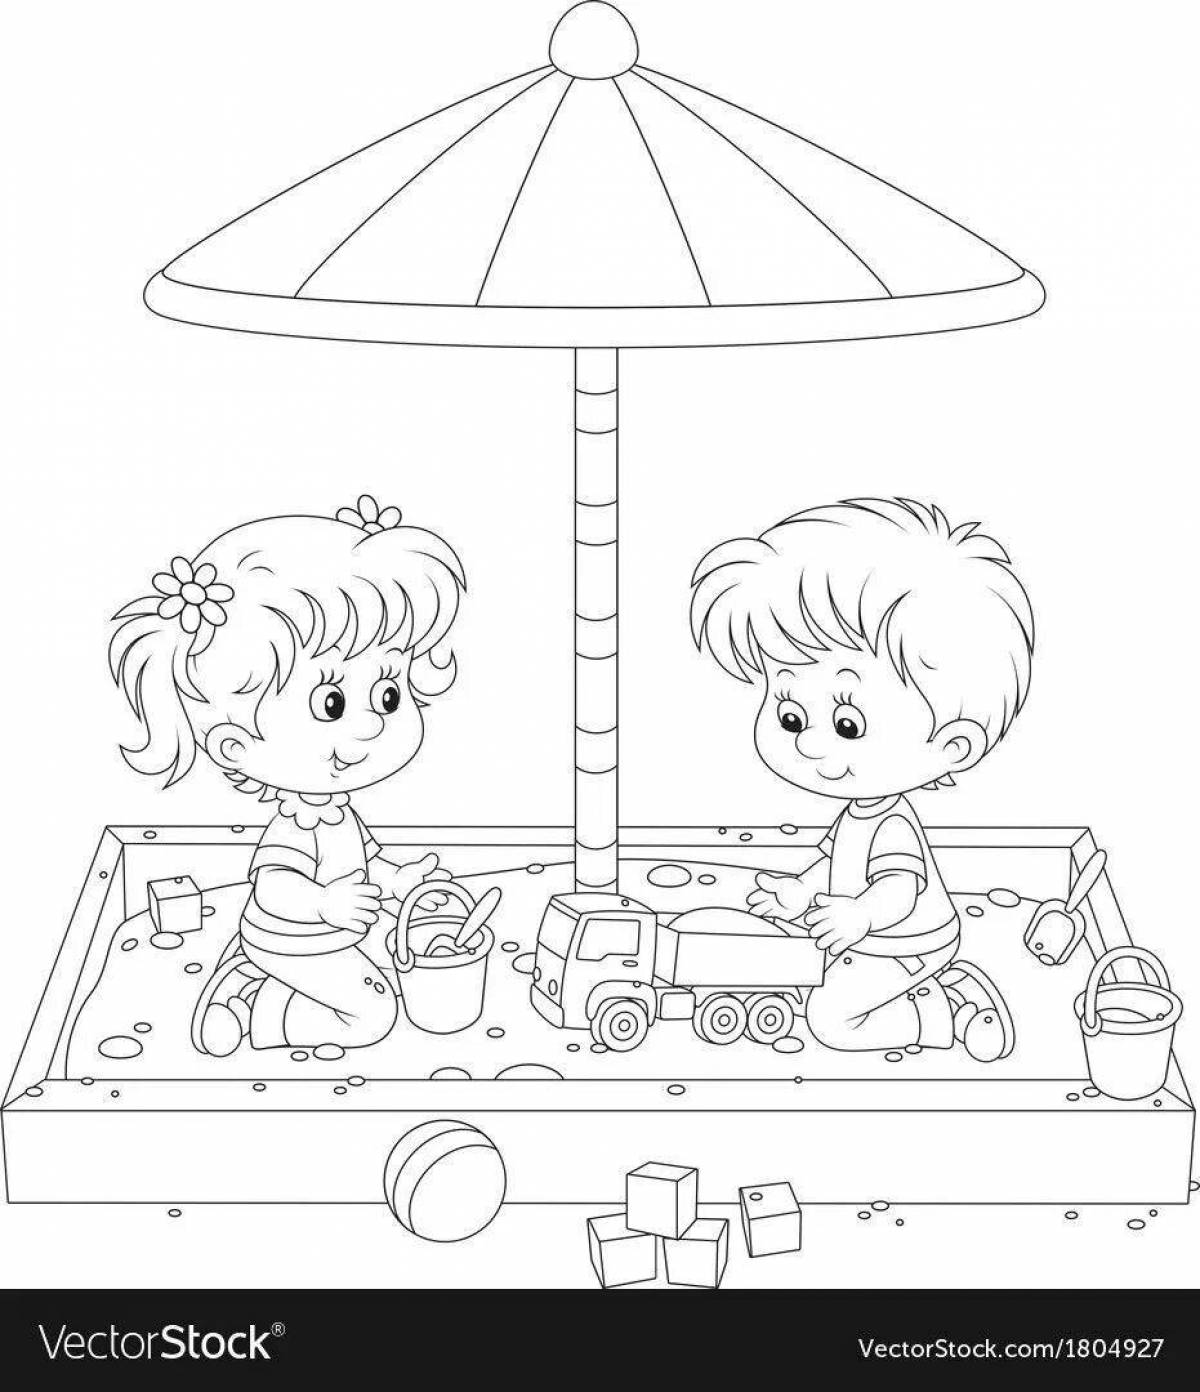 A fun sandbox coloring book for the little ones